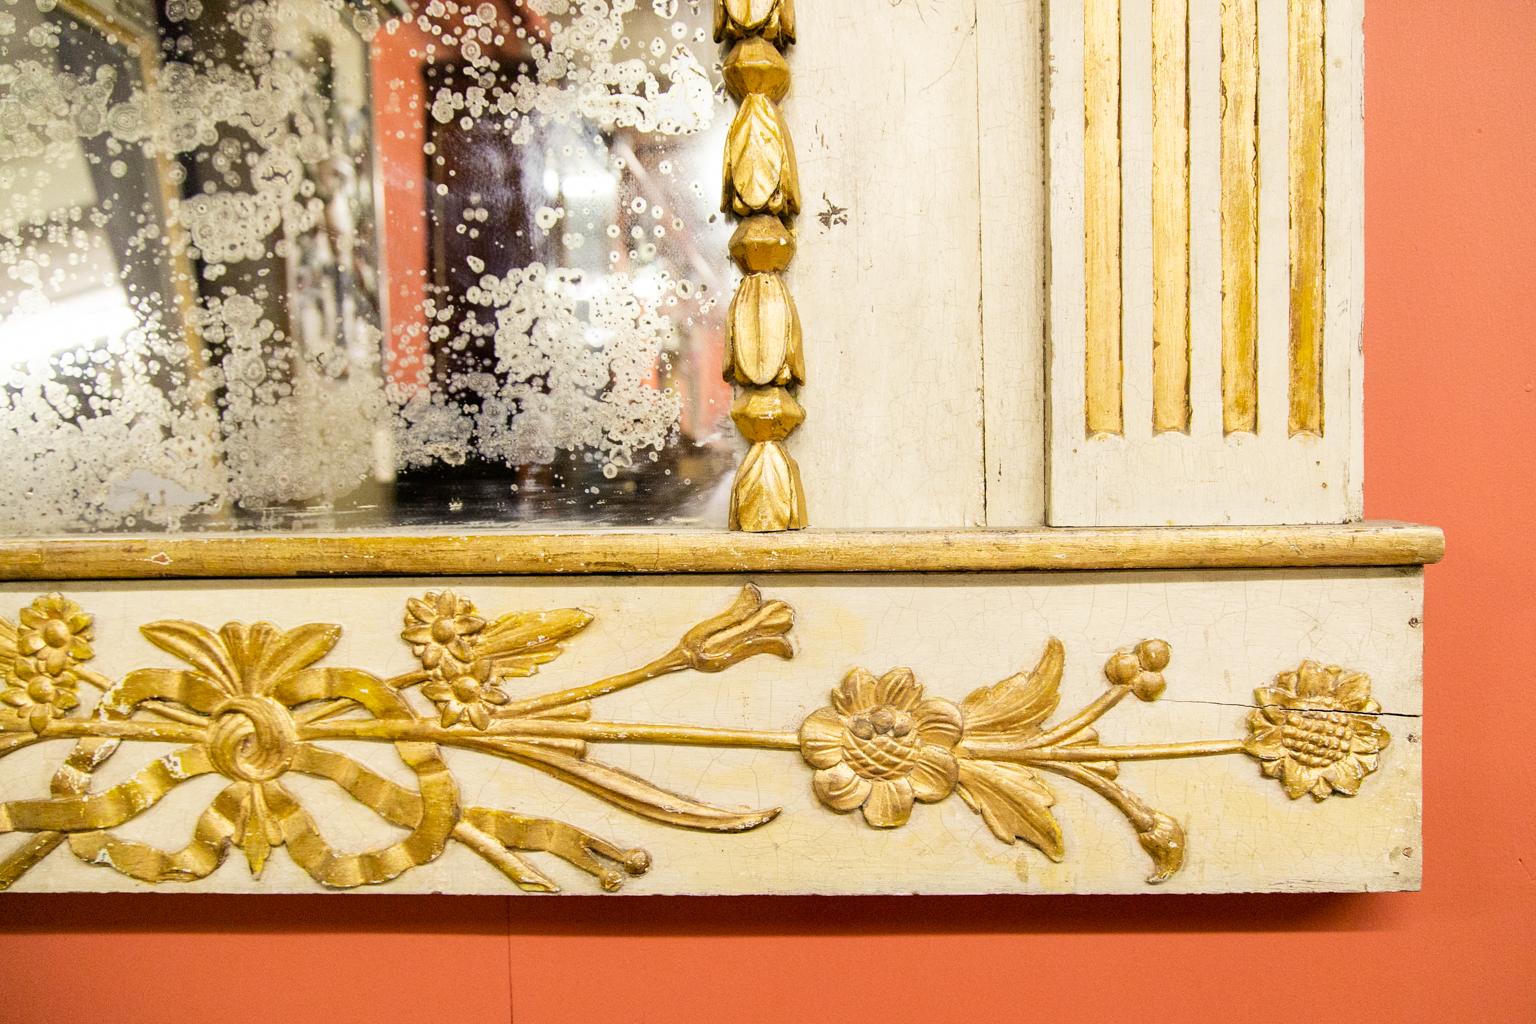 Italian carved gilt mirror that is distressed due to age. It depicts angel figures with wings and gold rays in the arch, with dentil molded cornice, stop fluted gilt, painted pilasters, and an arched mirror surrounded by carved high relief flowers.